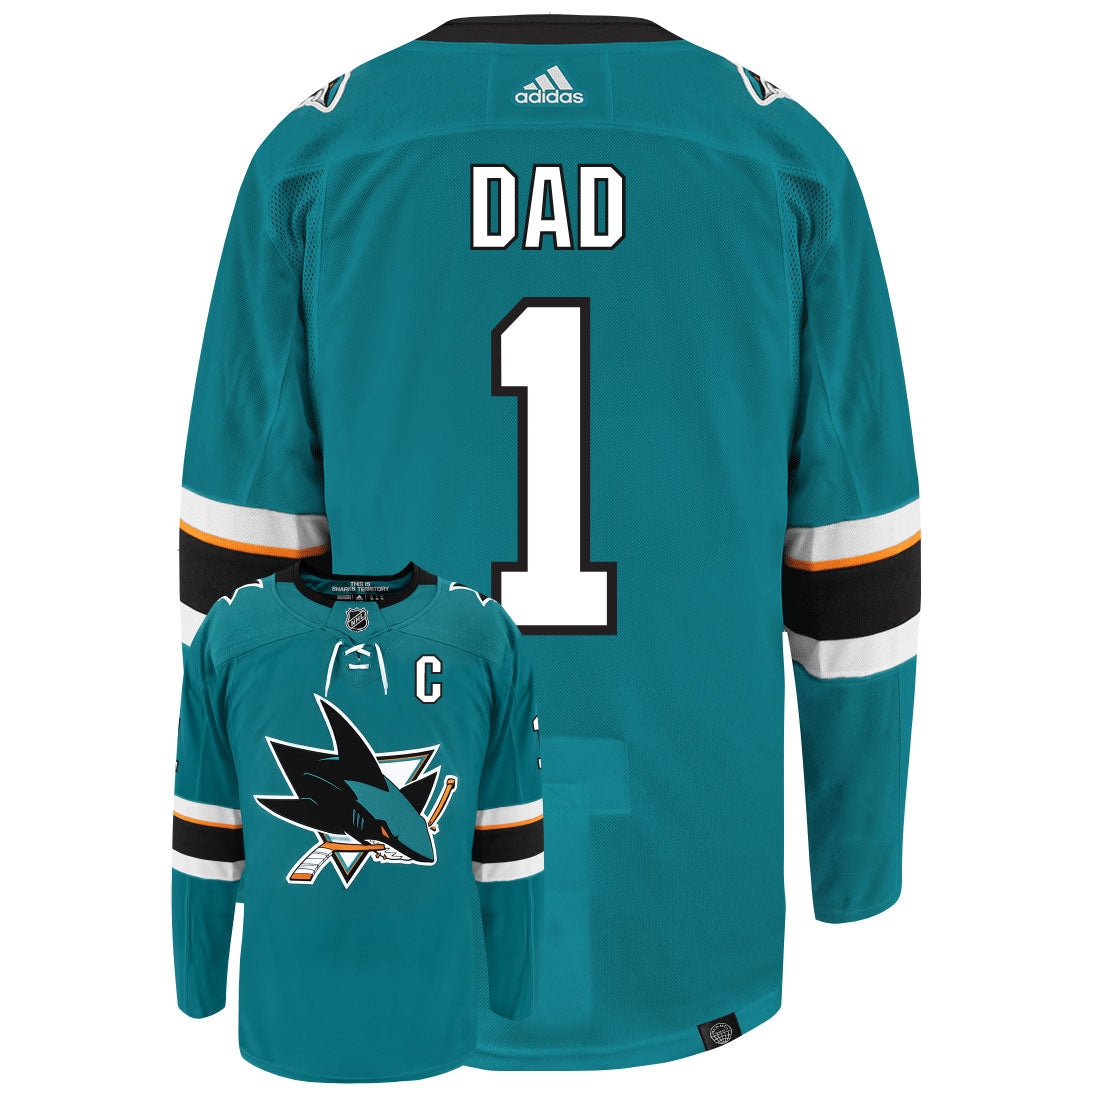 San Jose Sharks Dad Number One Adidas Primegreen Authentic NHL Hockey Jersey - Back/Front View